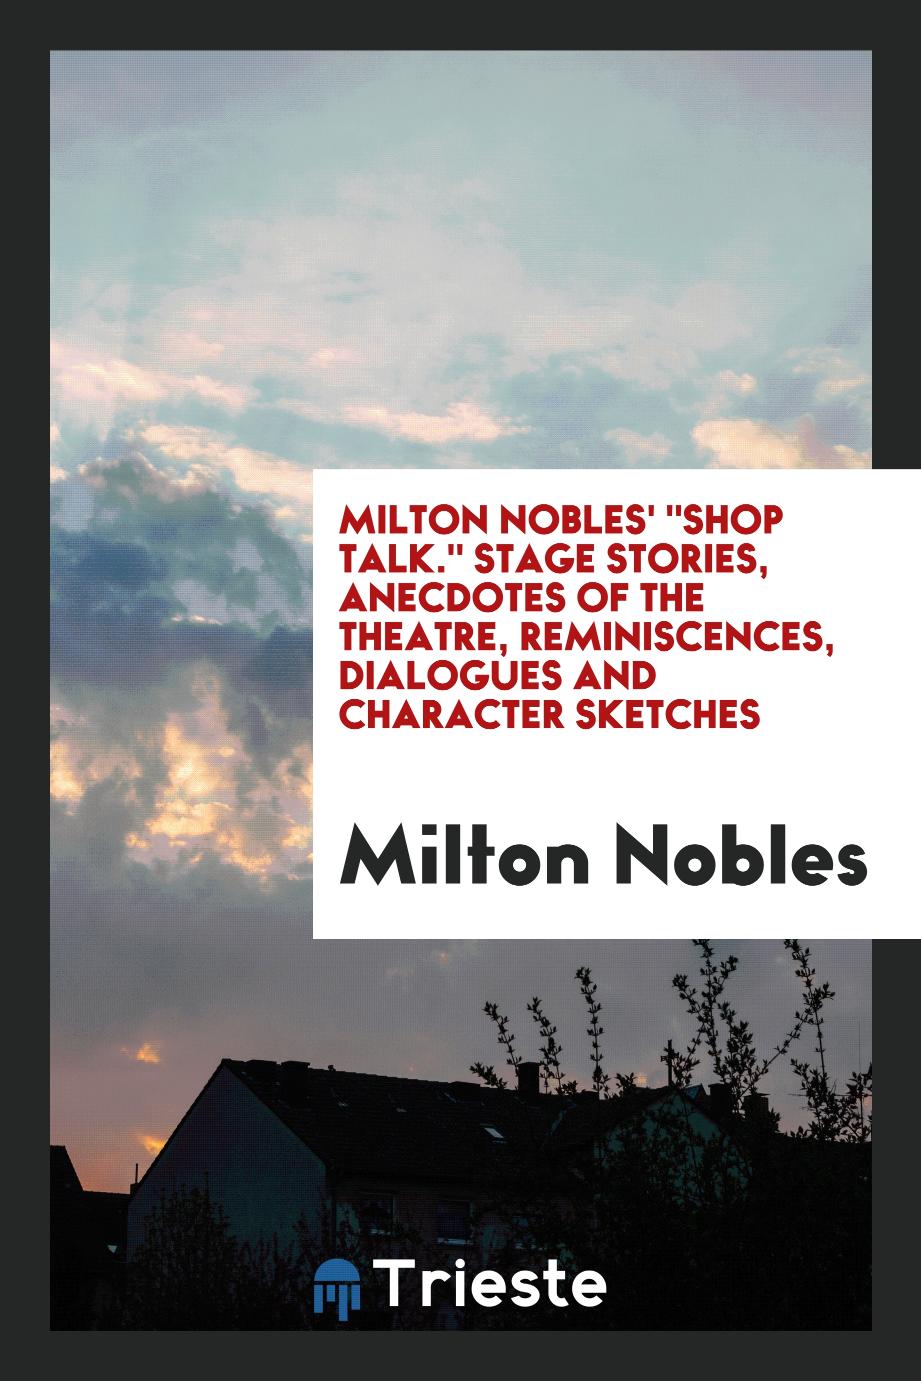 Milton Nobles' "Shop talk." Stage stories, anecdotes of the theatre, reminiscences, dialogues and character sketches